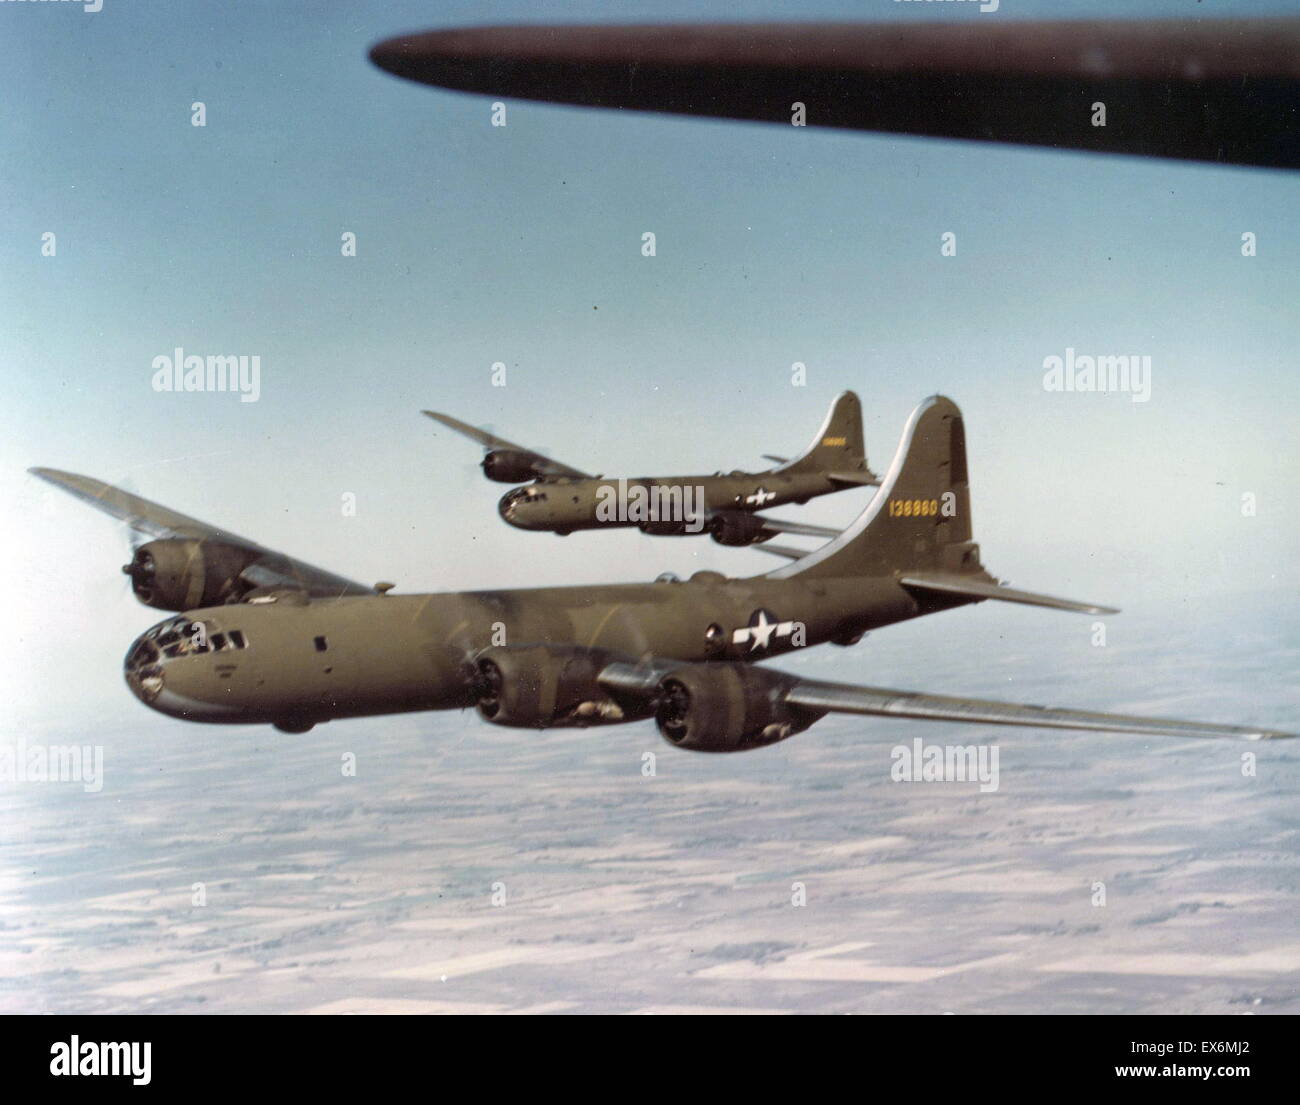 US Air Force B-29 bombers, 1943 Stock Photo